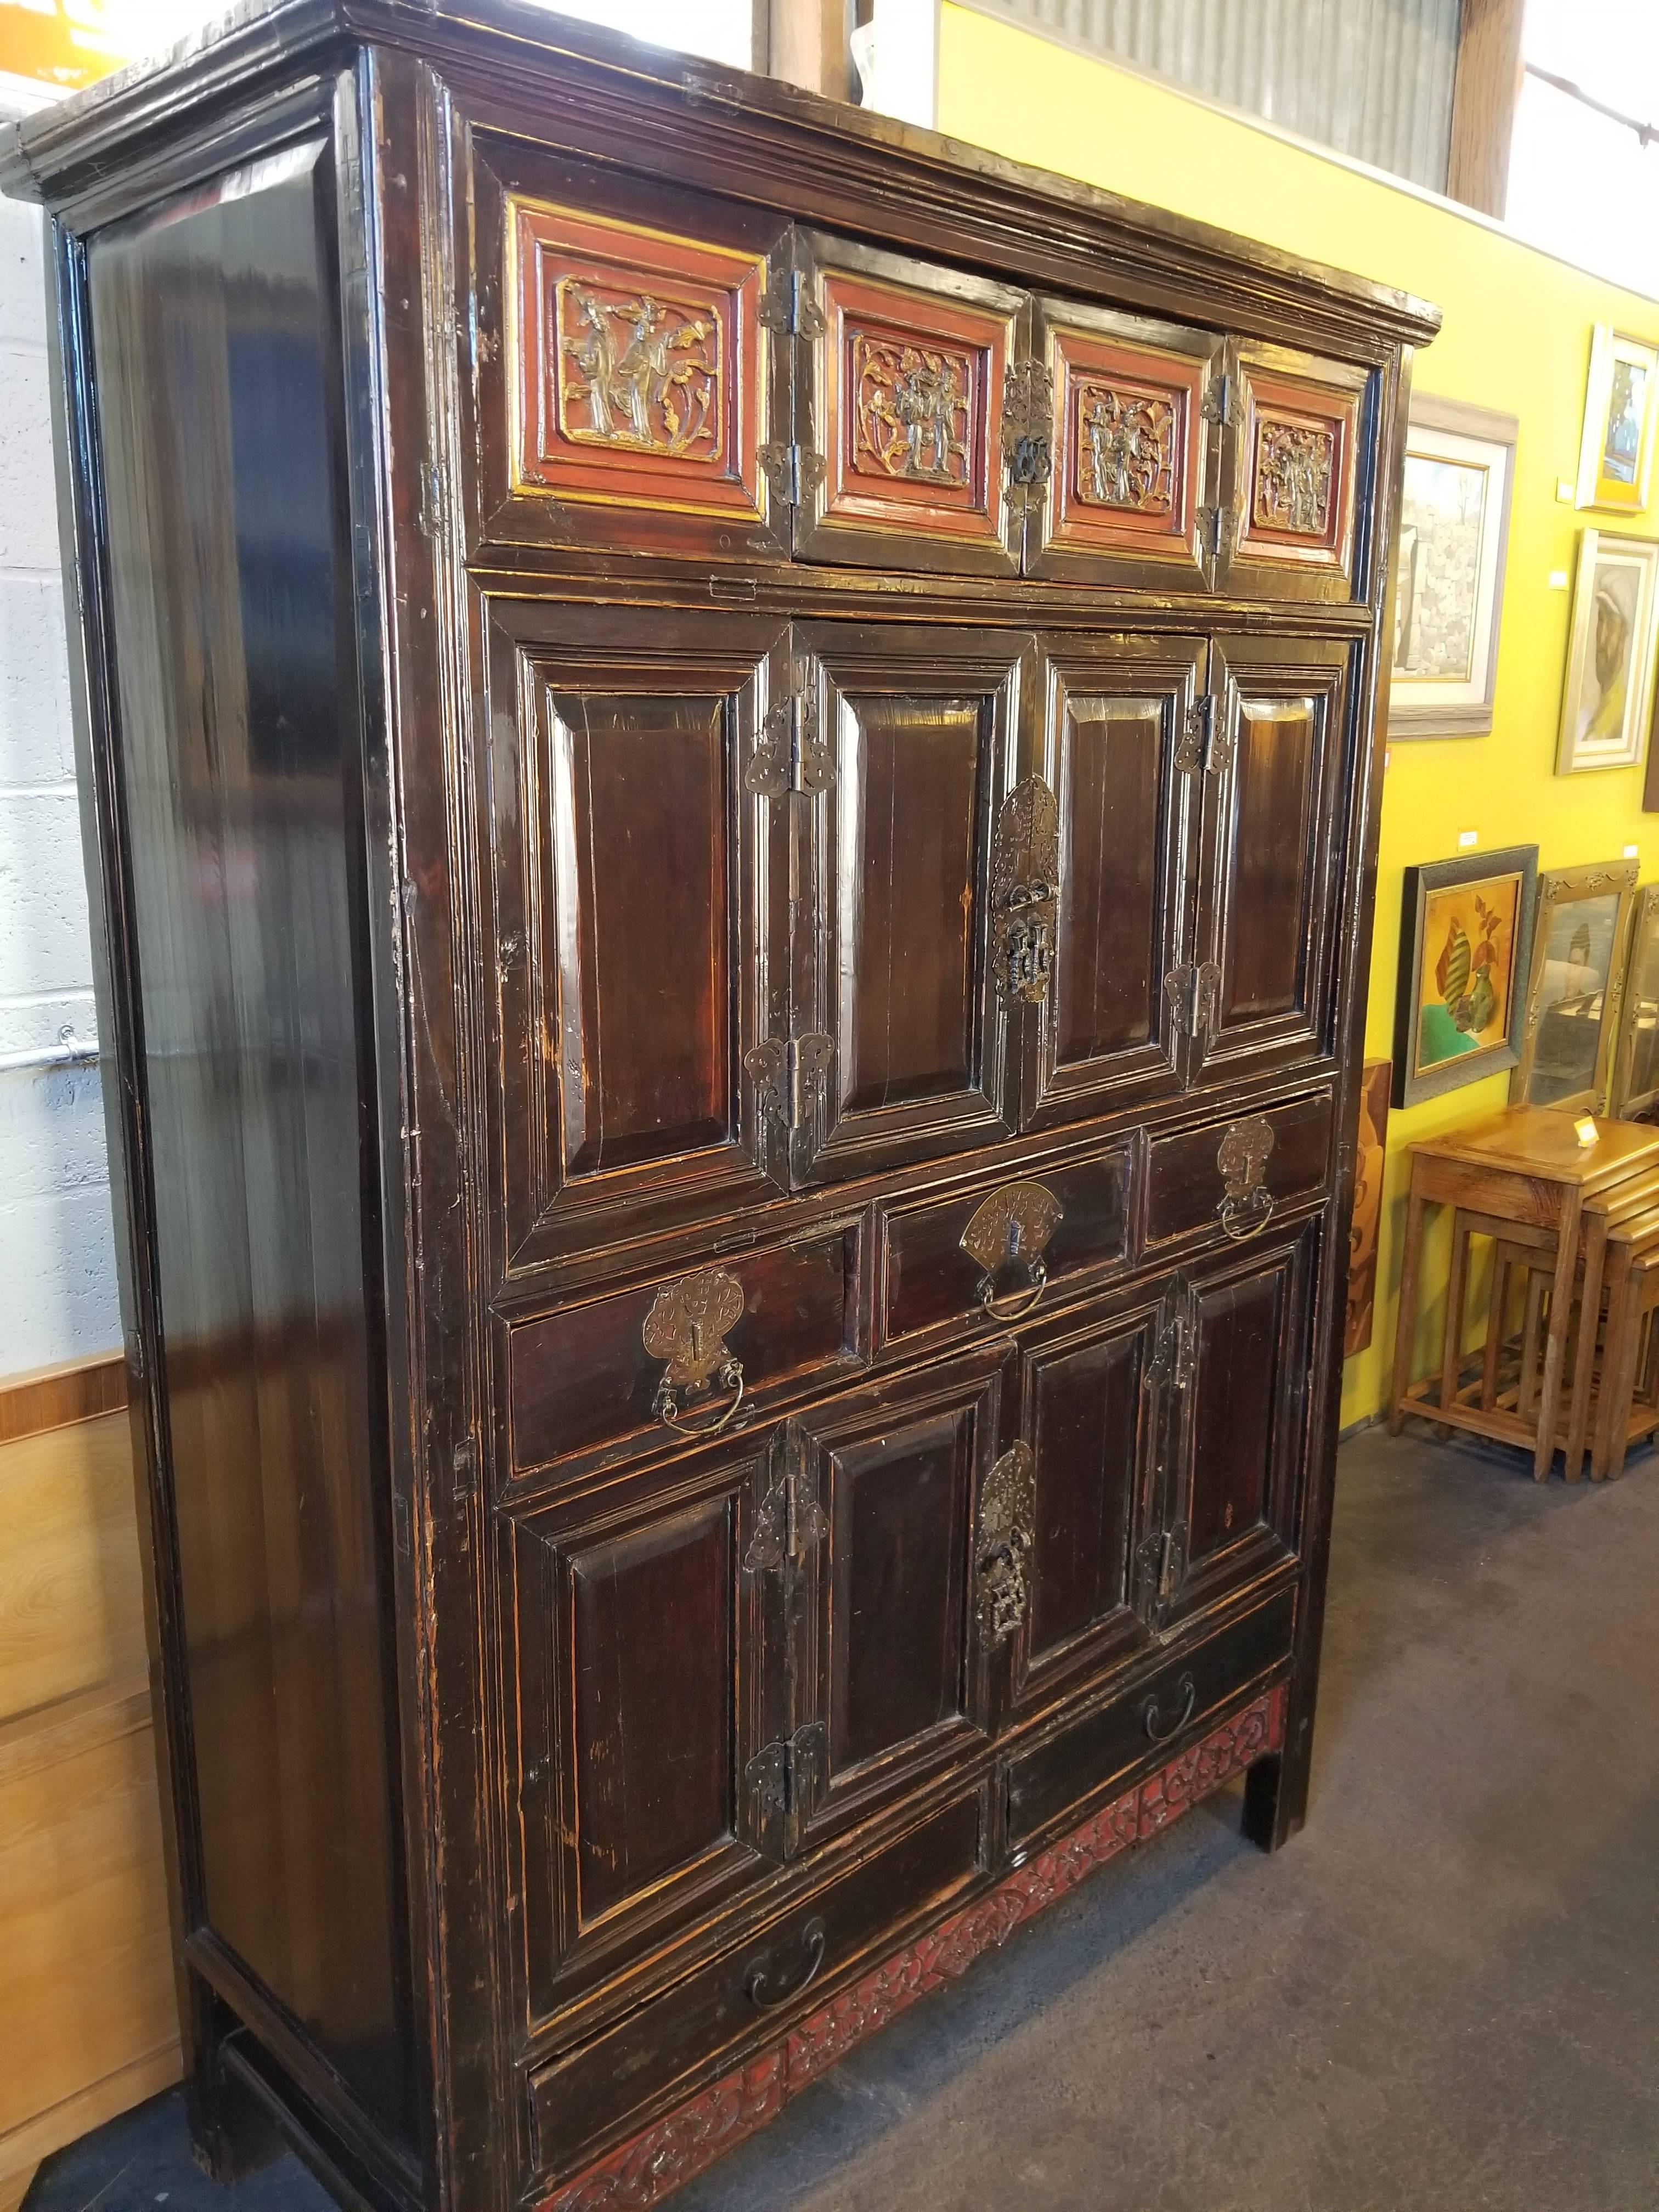 Impressive large-scale 19th century antique storage cabinet from Zhejiang, China. Ample storage with multiple cabinet doors and drawers. Handsome original metal incised hardware and red lacquer detail with figures. Mortise and tenon construction. A